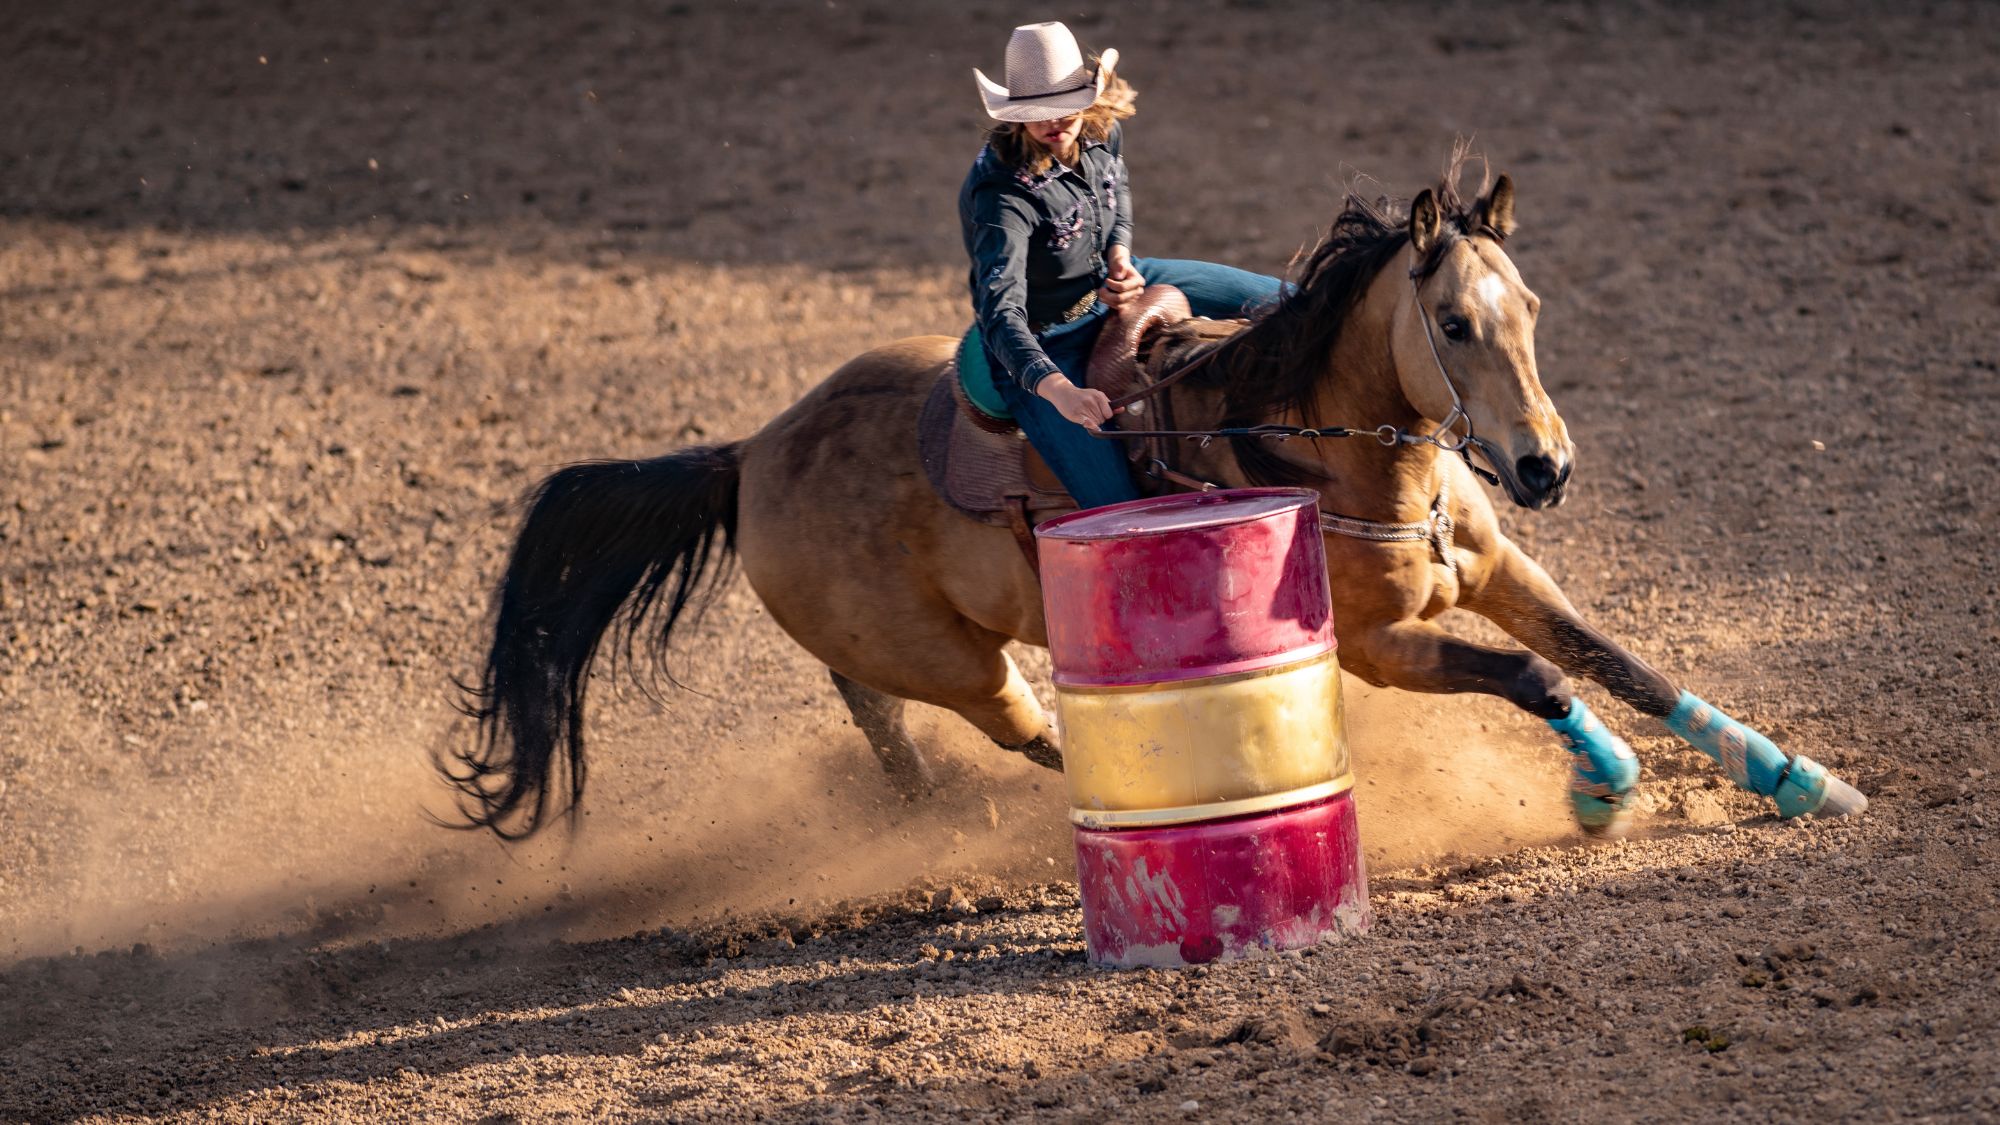 Photo of horse barrell racing to illustrate Sheriff's Rodeo.